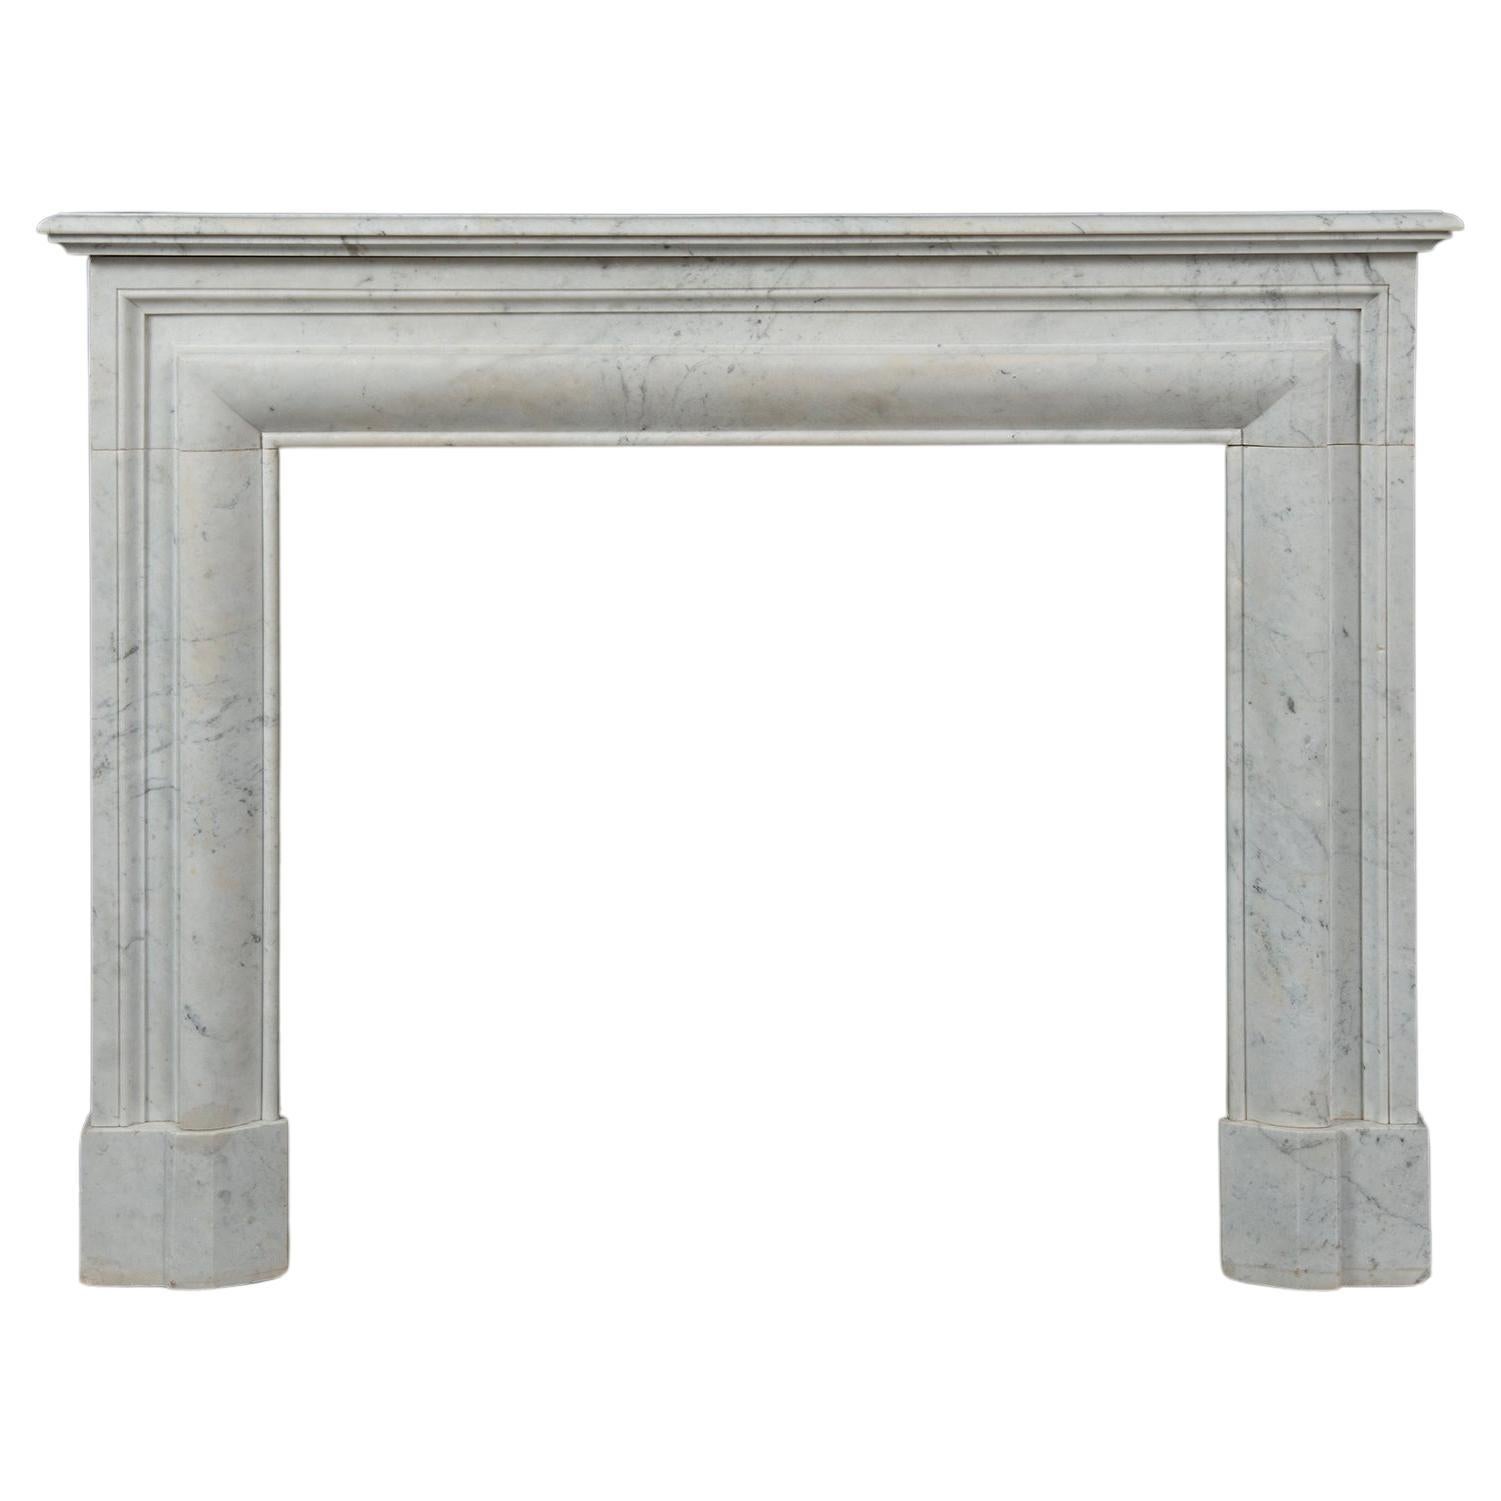 Antique White Marble Fireplace Mantel For Sale